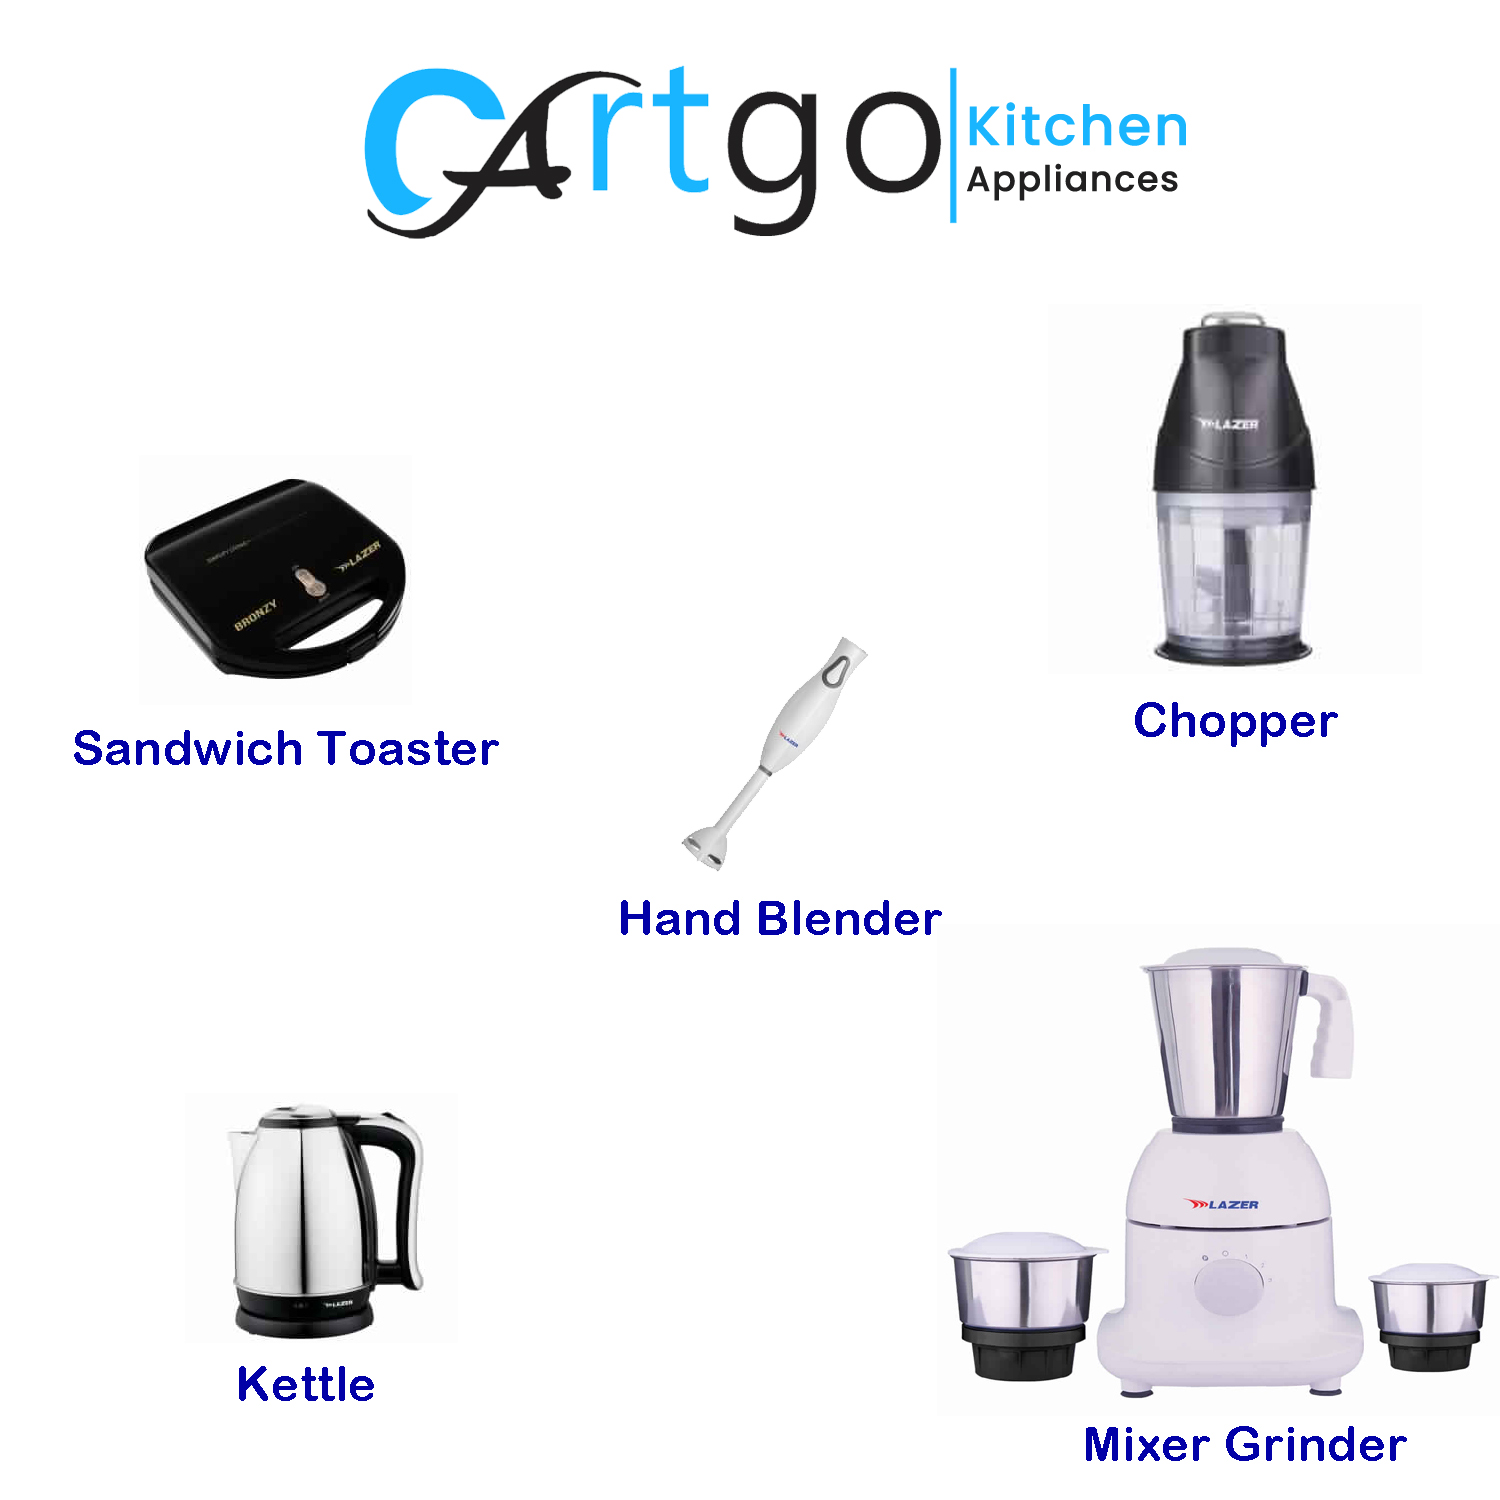 Cartgo - Top 5 Small Kitchen Appliances which every kitchen should have